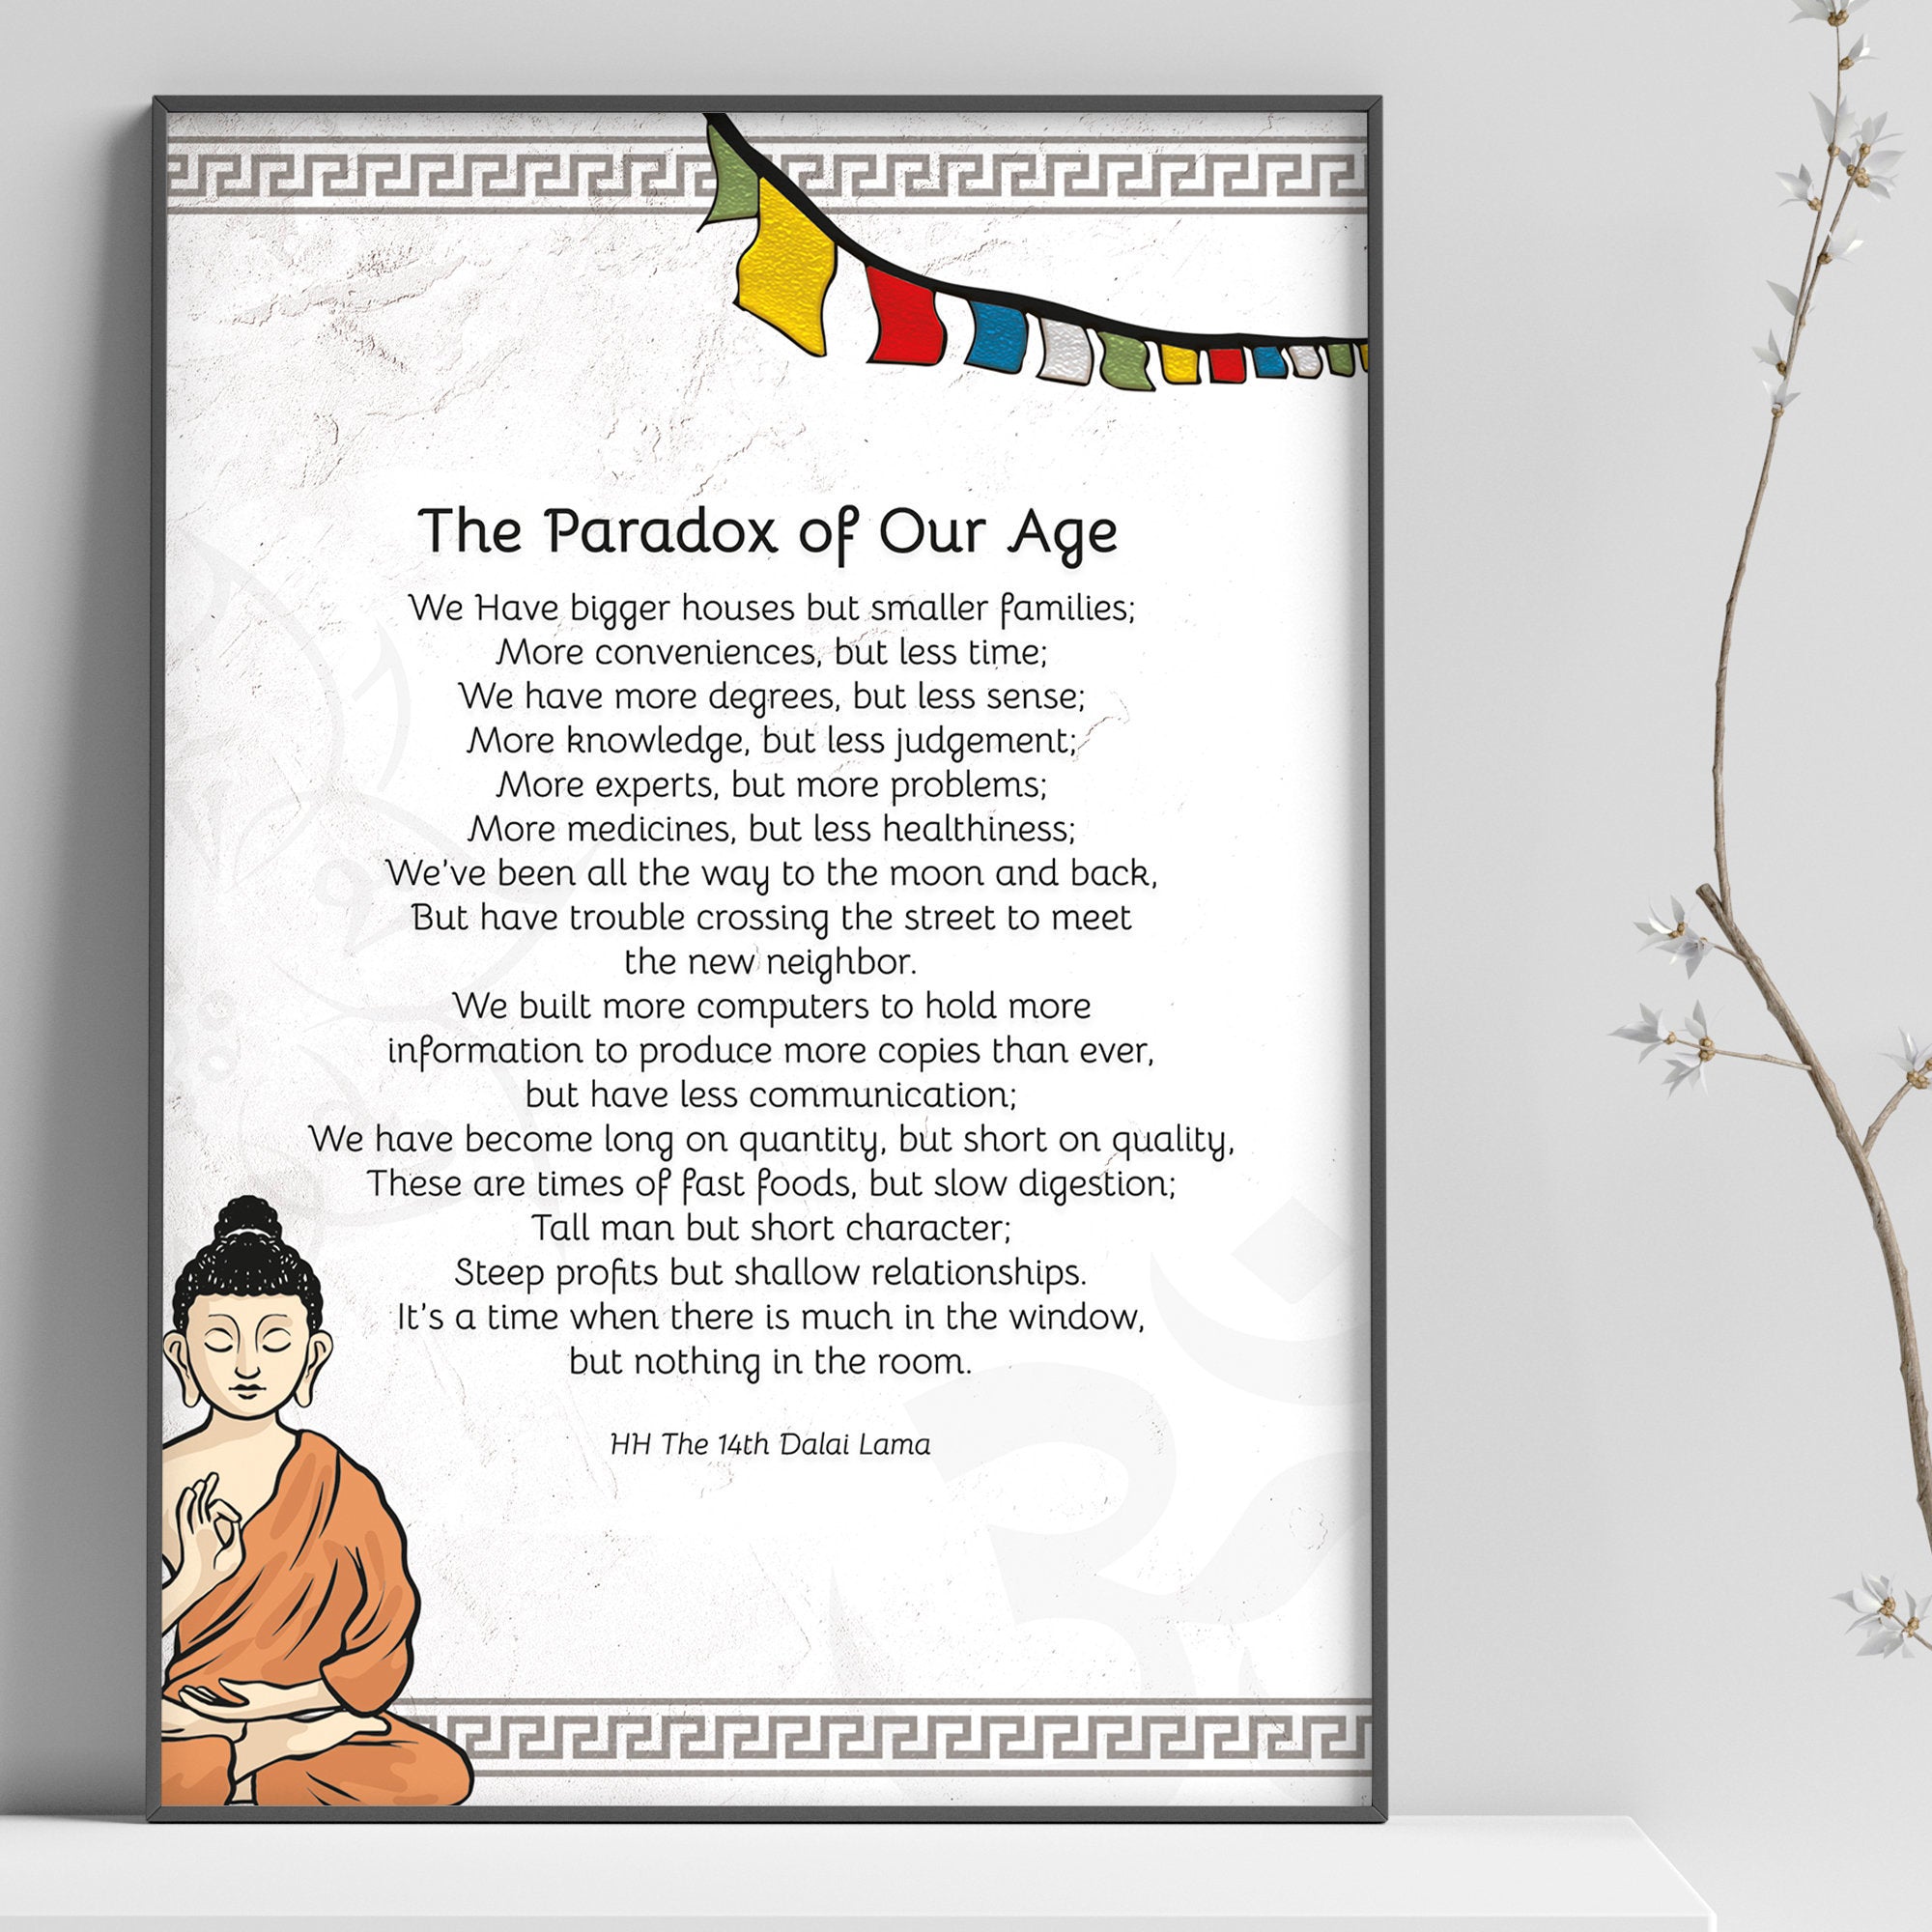 Quotes Prints for Cards, Wall art, Posters. &quot;The Paradox of Our Age&quot; Wisdom quotes by HH the Dalai Lama for instant download